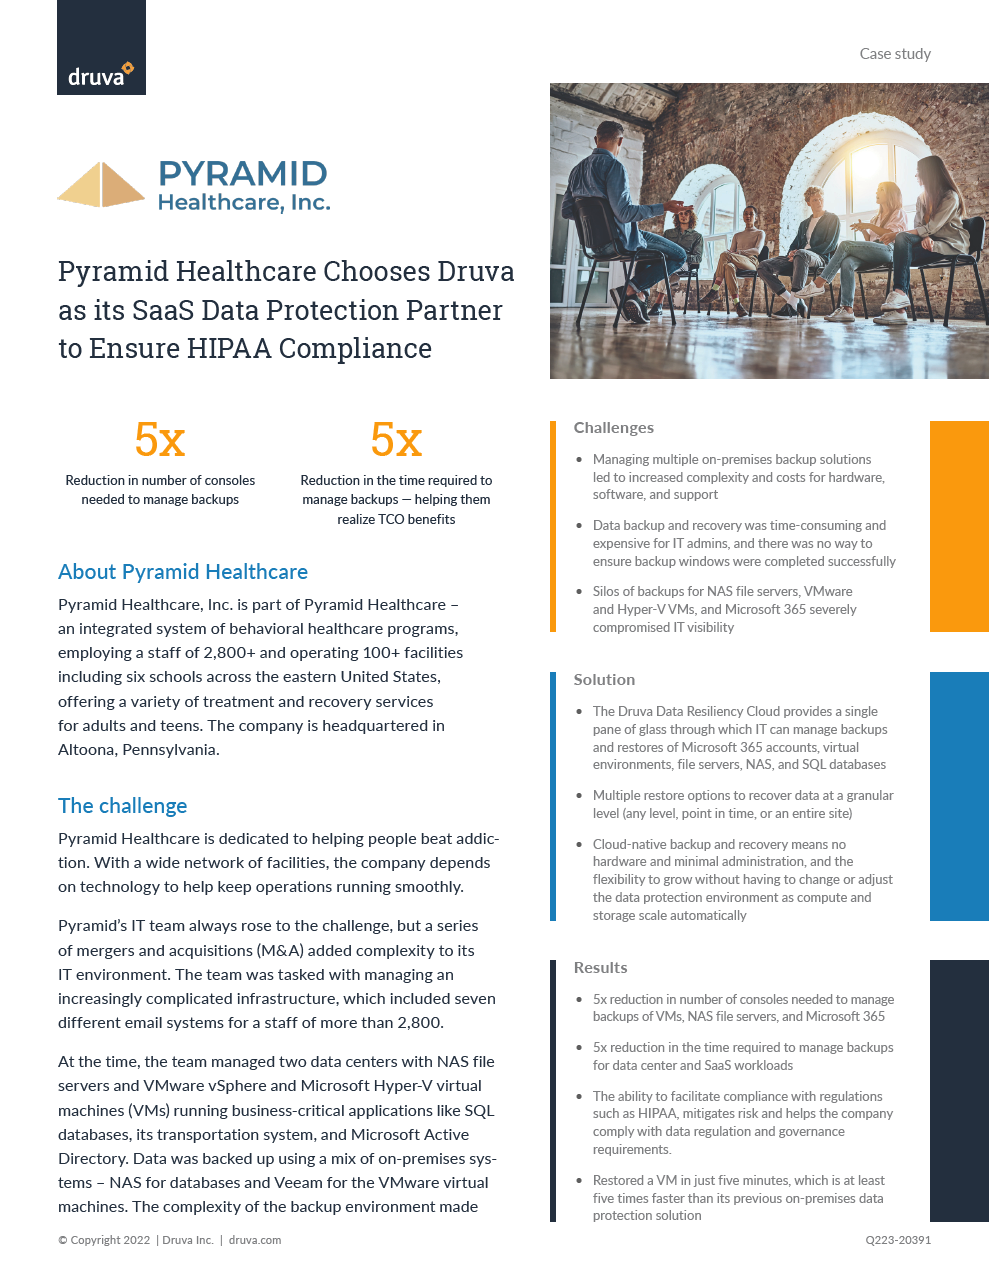 Pyramid Healthcare chooses Druva as its SaaS data protection partner to ensure HIPAA compliance